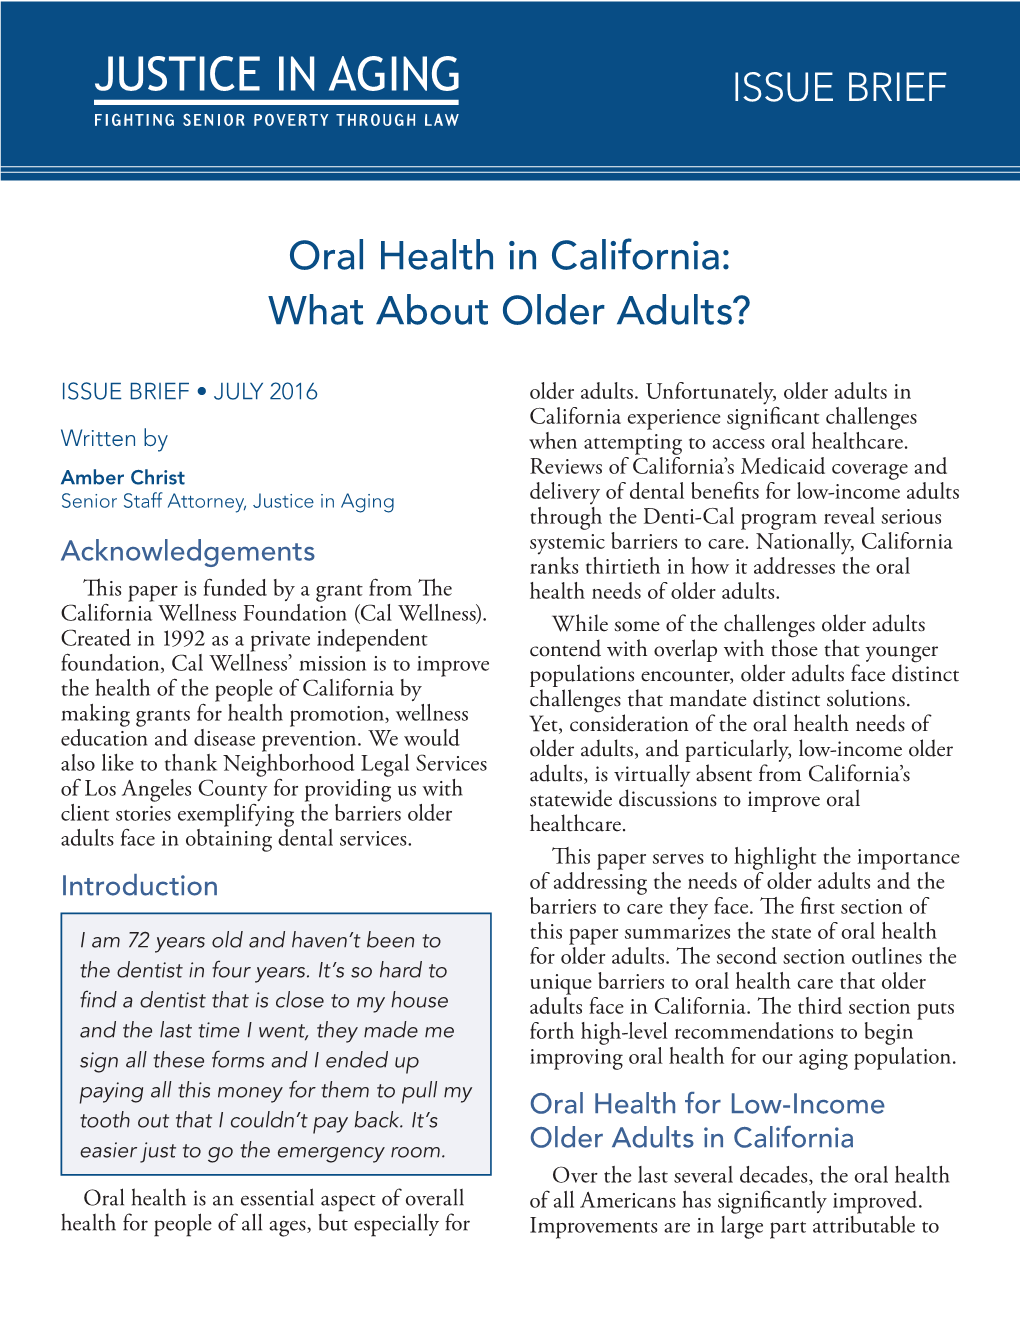 Oral Health in California: What About Older Adults?